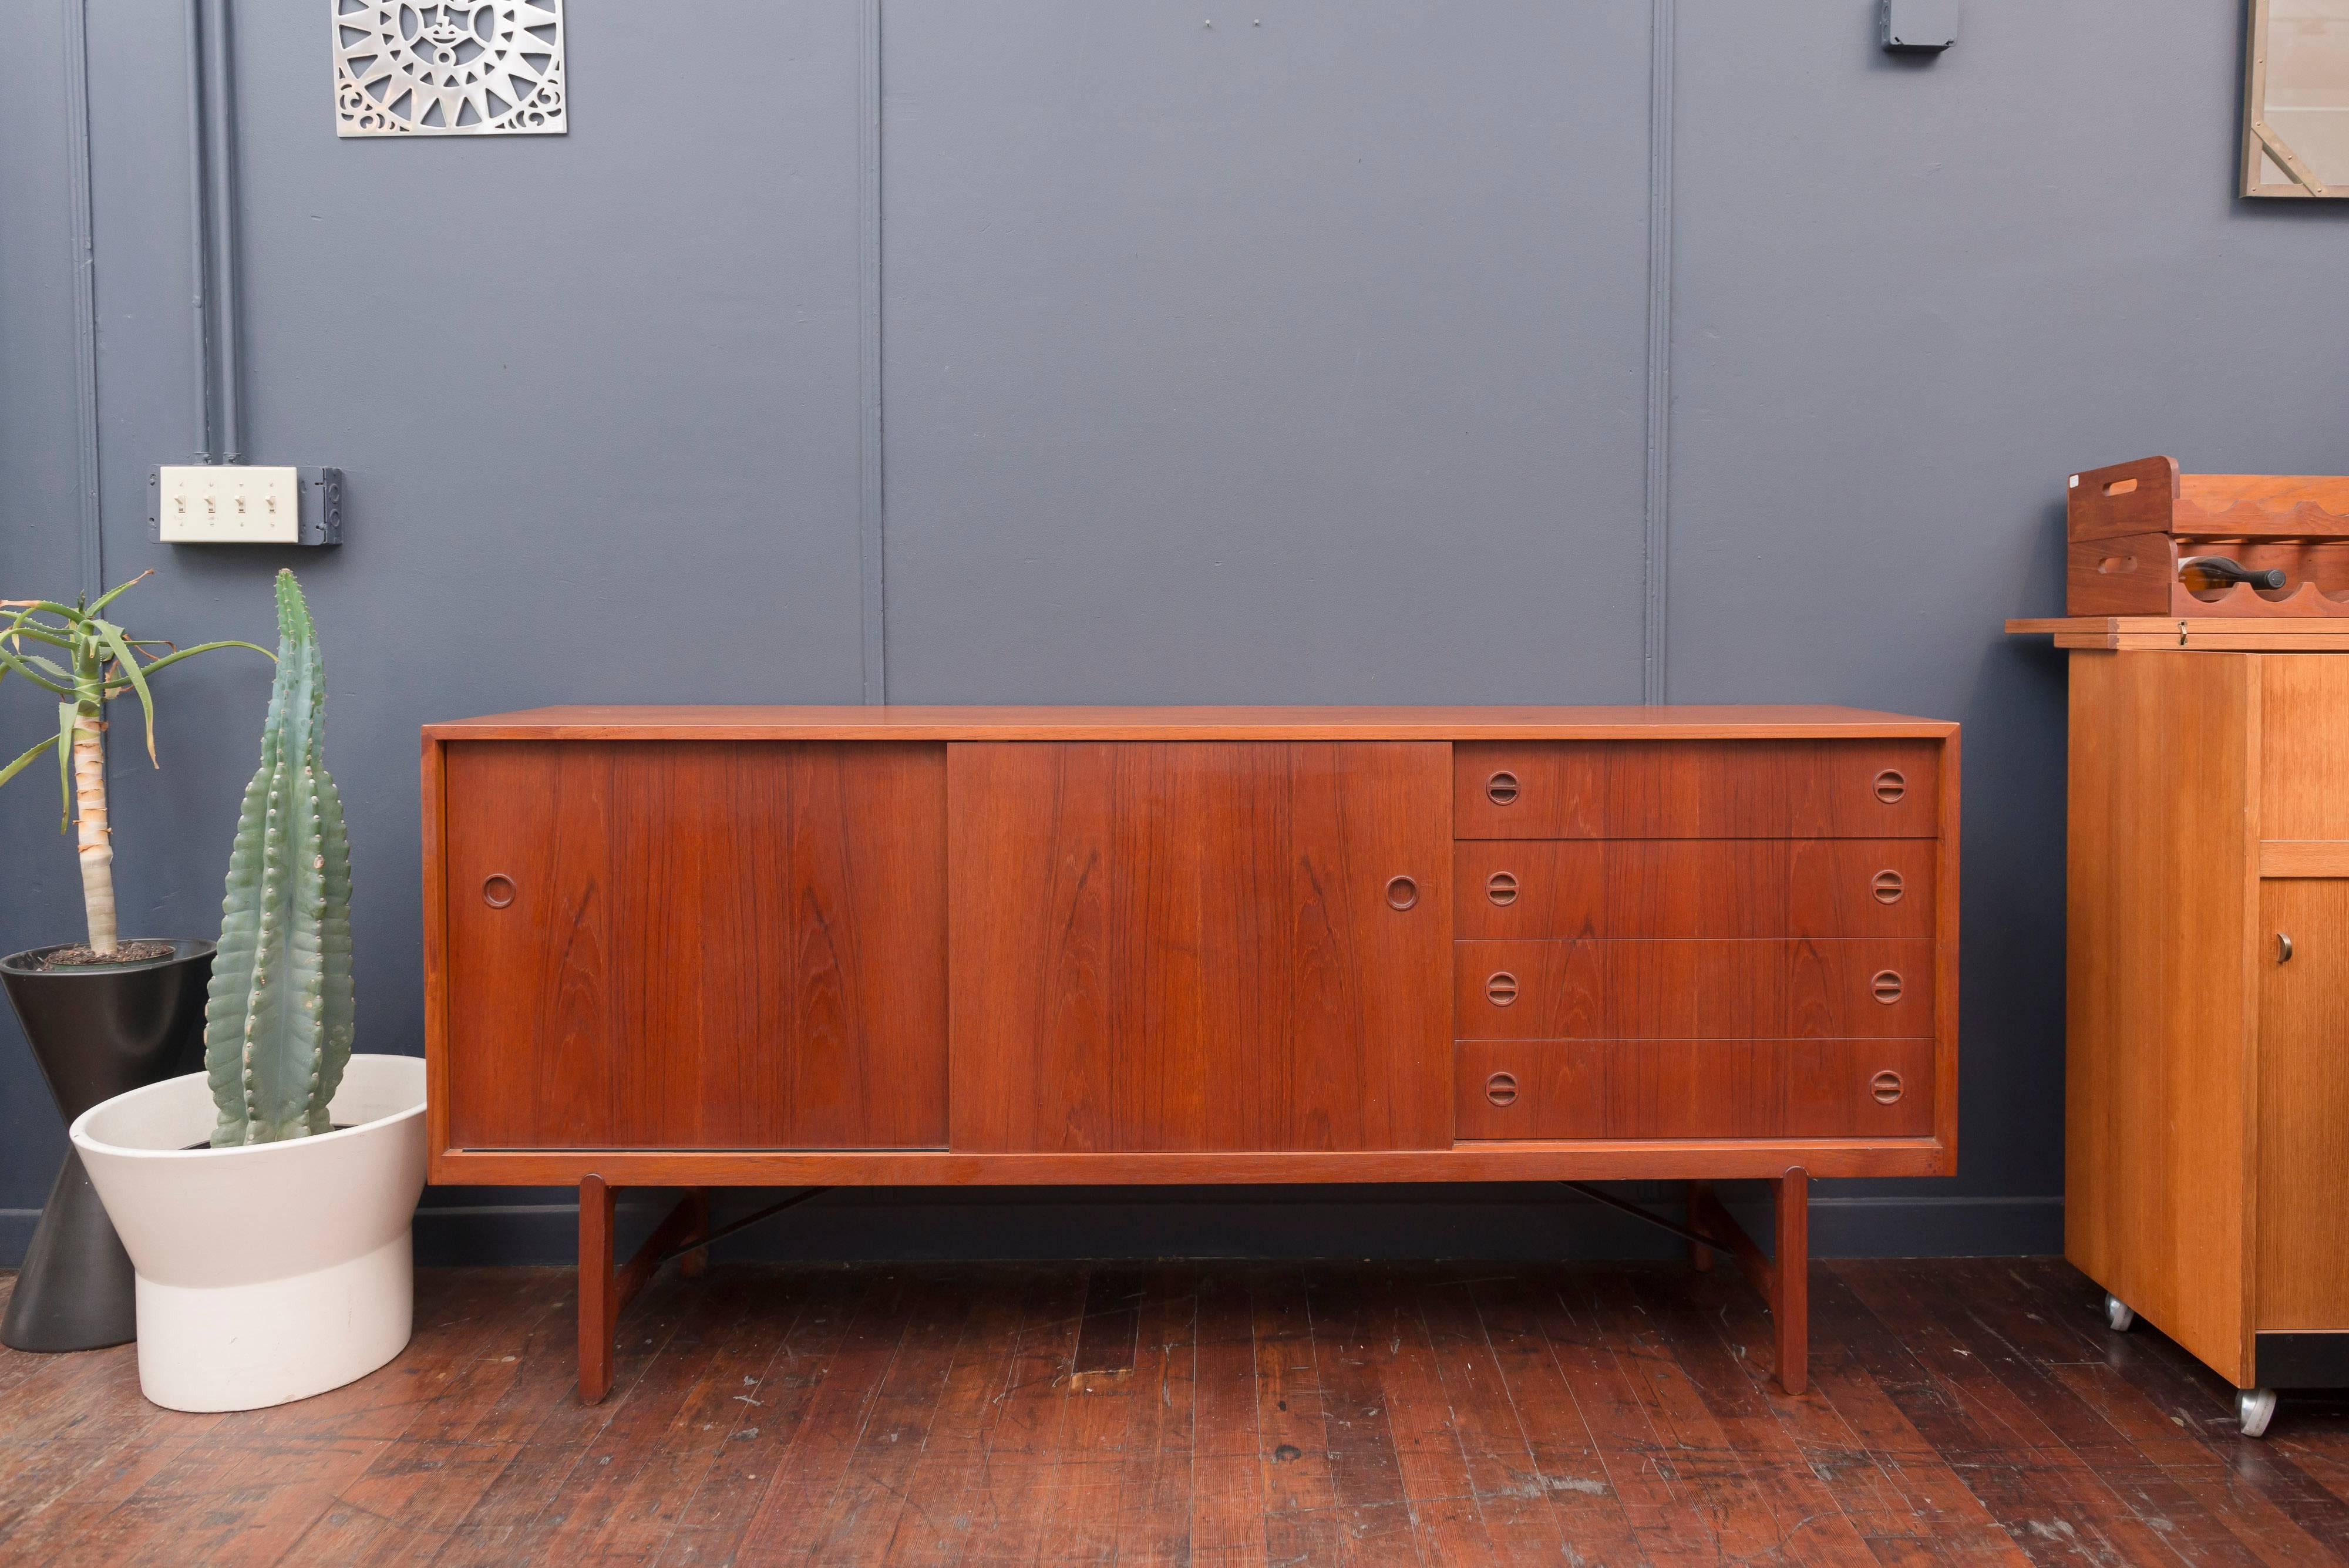 Rare teak credenza designed by Ejnar Larsen & Aksel Bender Madsen for Naestved Mobelfabrik, Denmark. Very high quality construction with two sliding doors, adjustable shelves and drawers. Supported on simple but sculpted teak legs and architectural